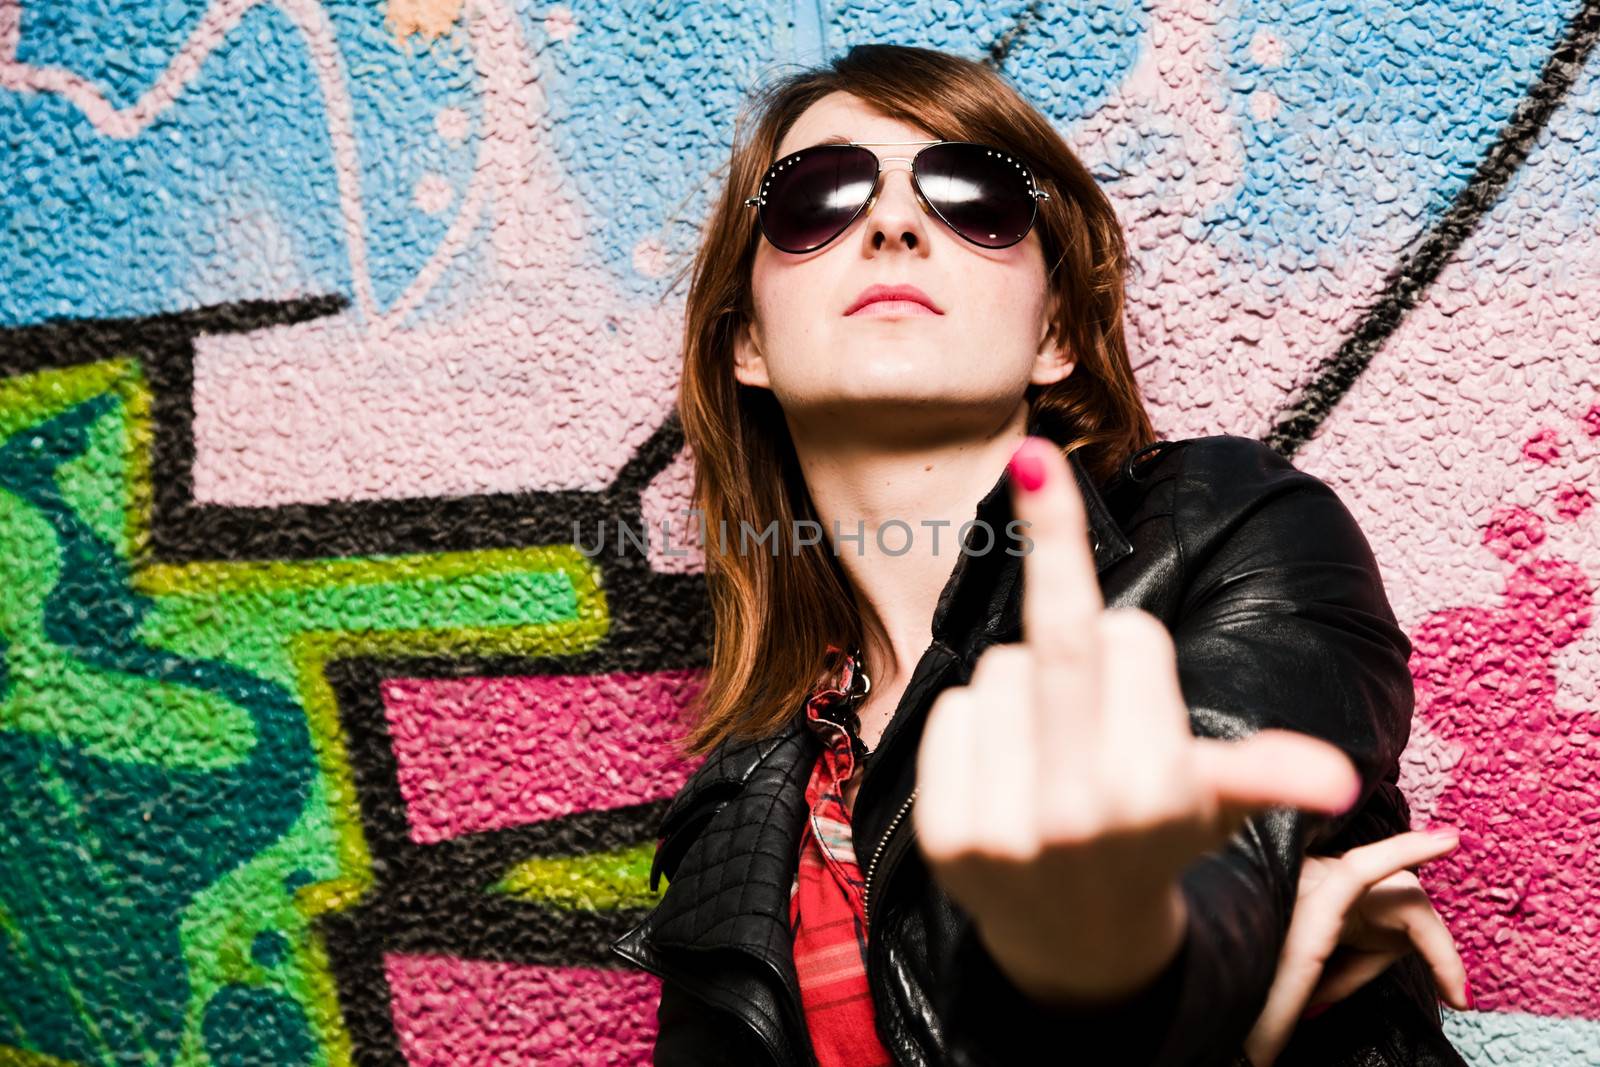 Stylish fashionable girl showing fuck off middle finger gesture against colorful graffiti wall.